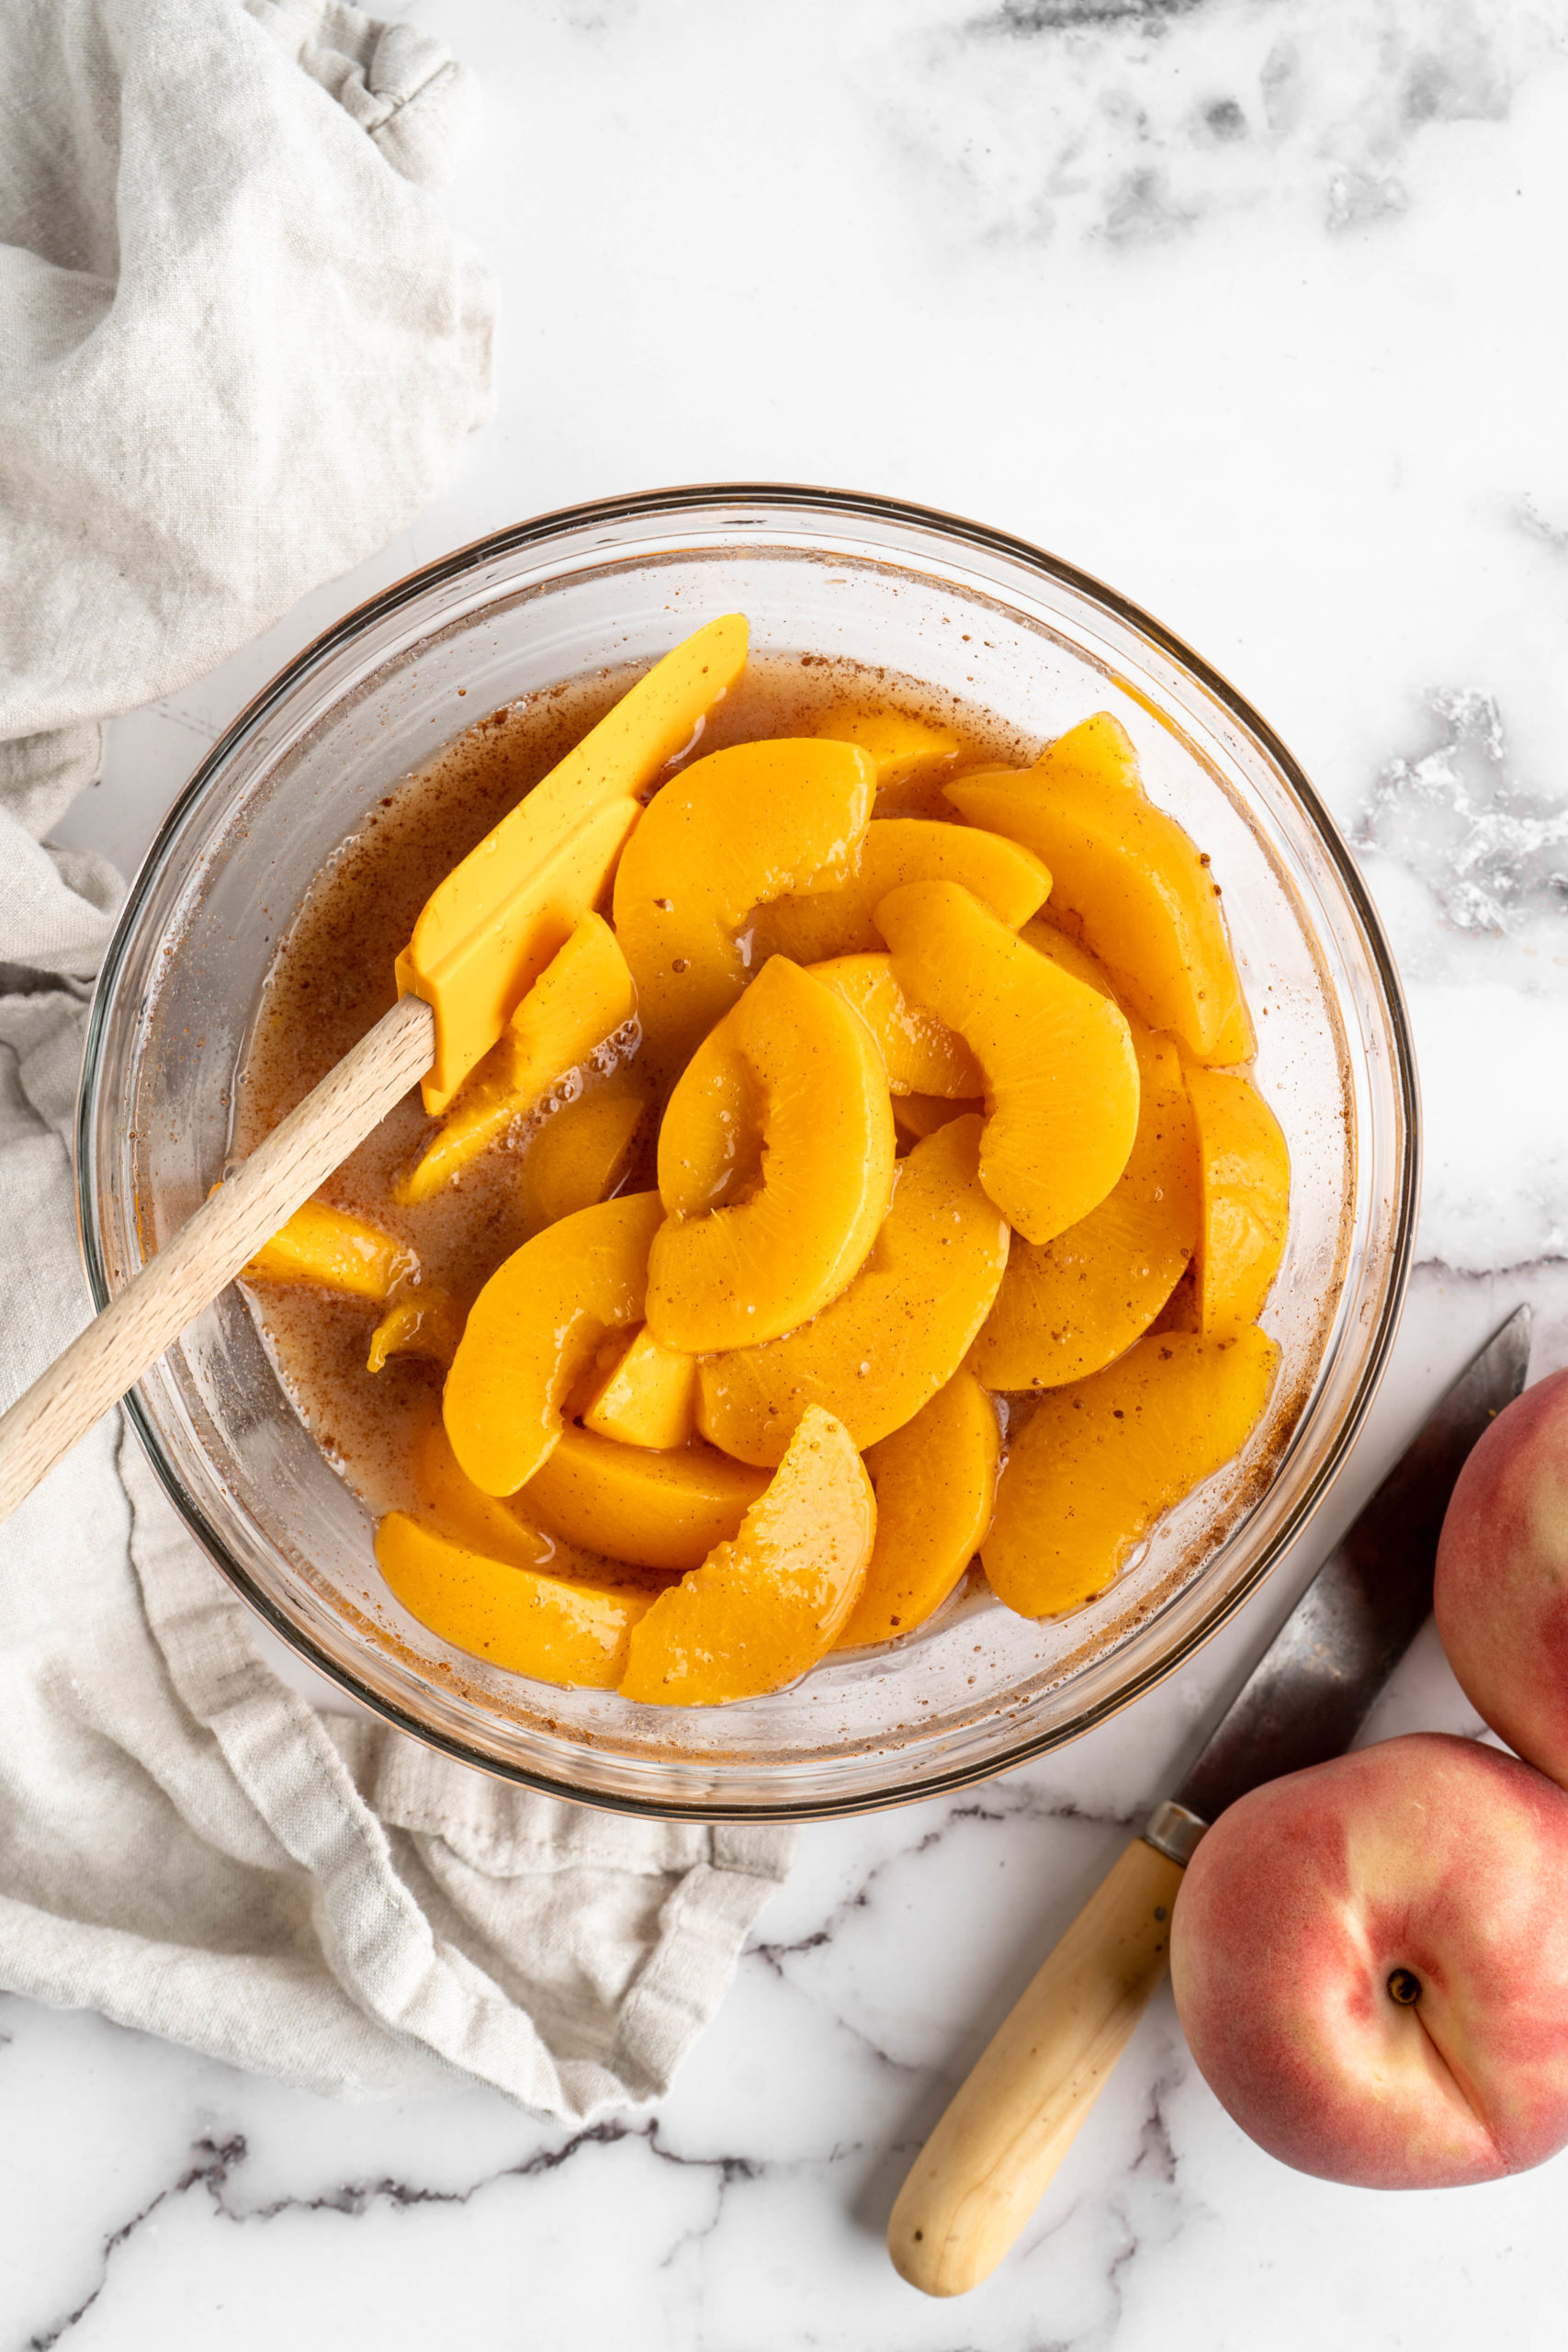 Overhead view of peaches in glass mixing bowl